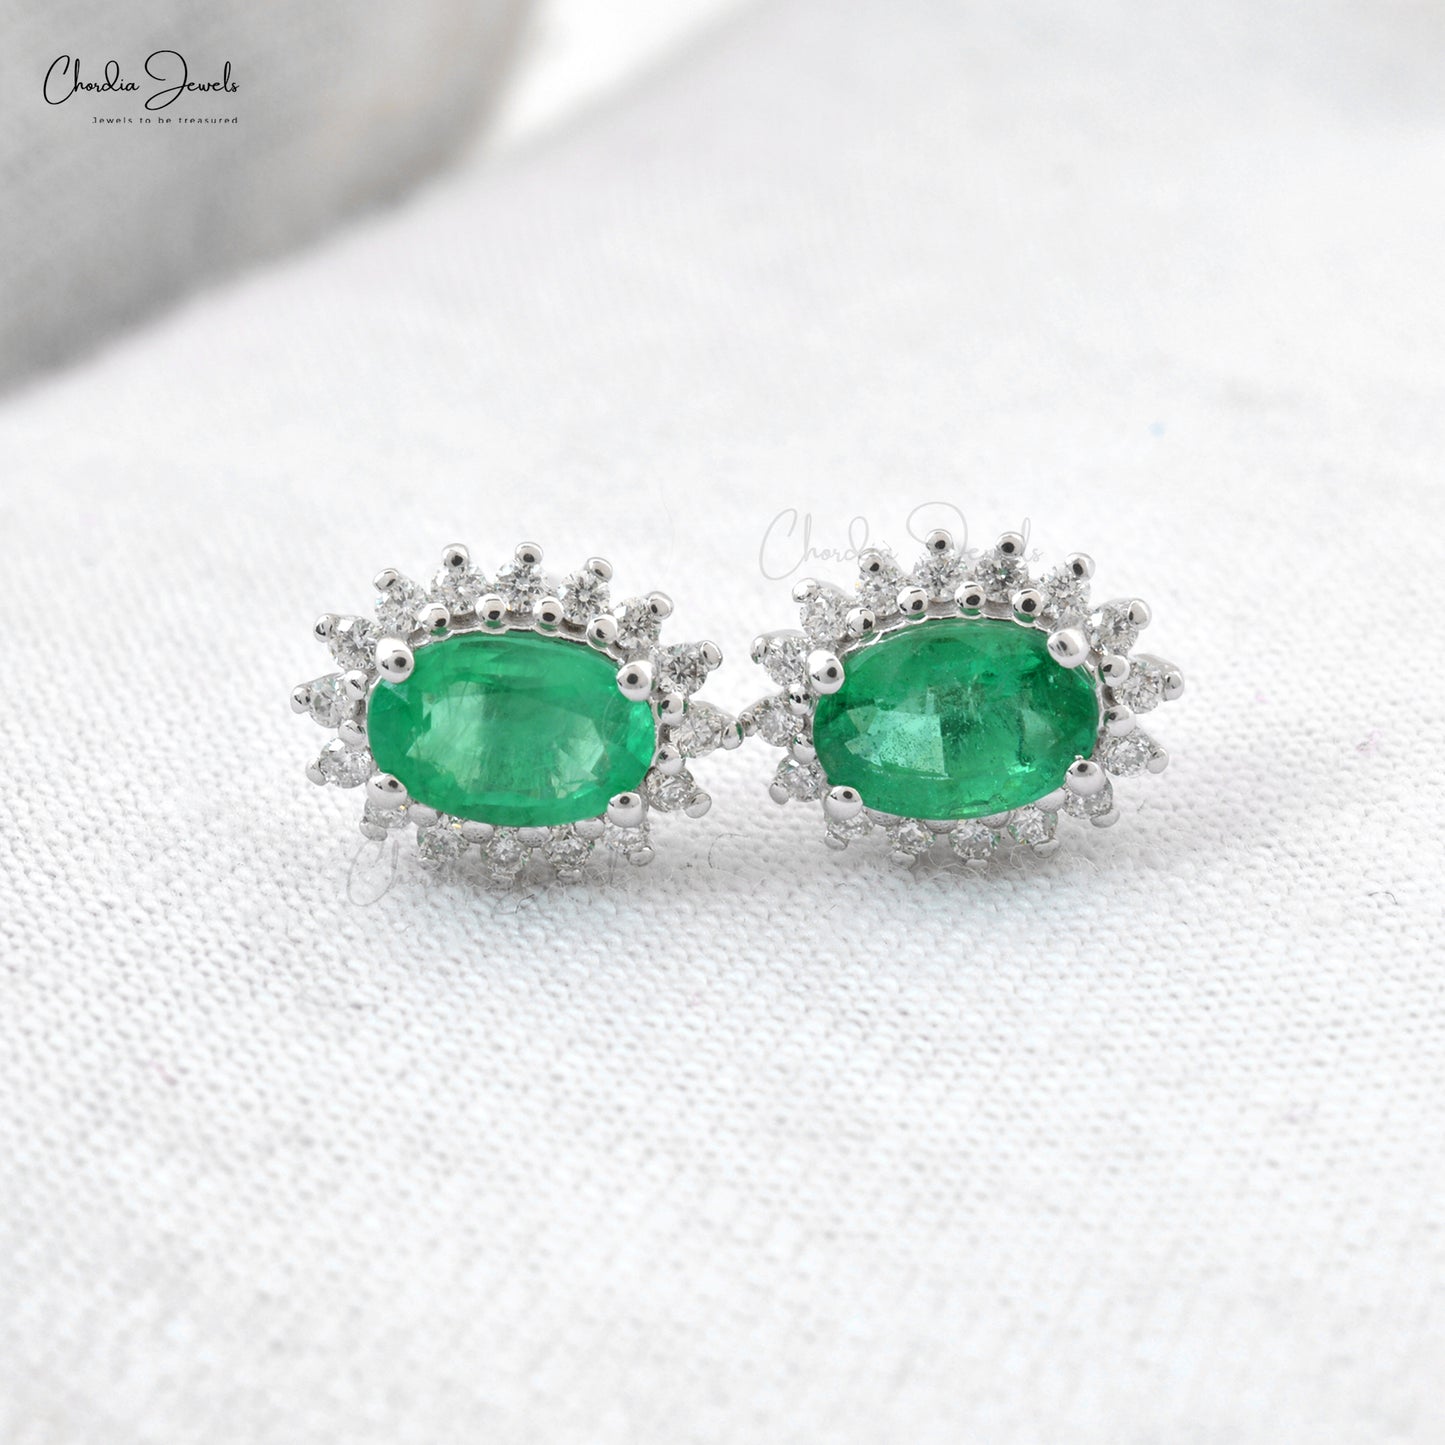 Natural Emerald Minimal Halo Earrings 14k Real White Gold Diamond Earrings 6x4mm Oval Cut Gemstone Vintage Jewelry For Women's